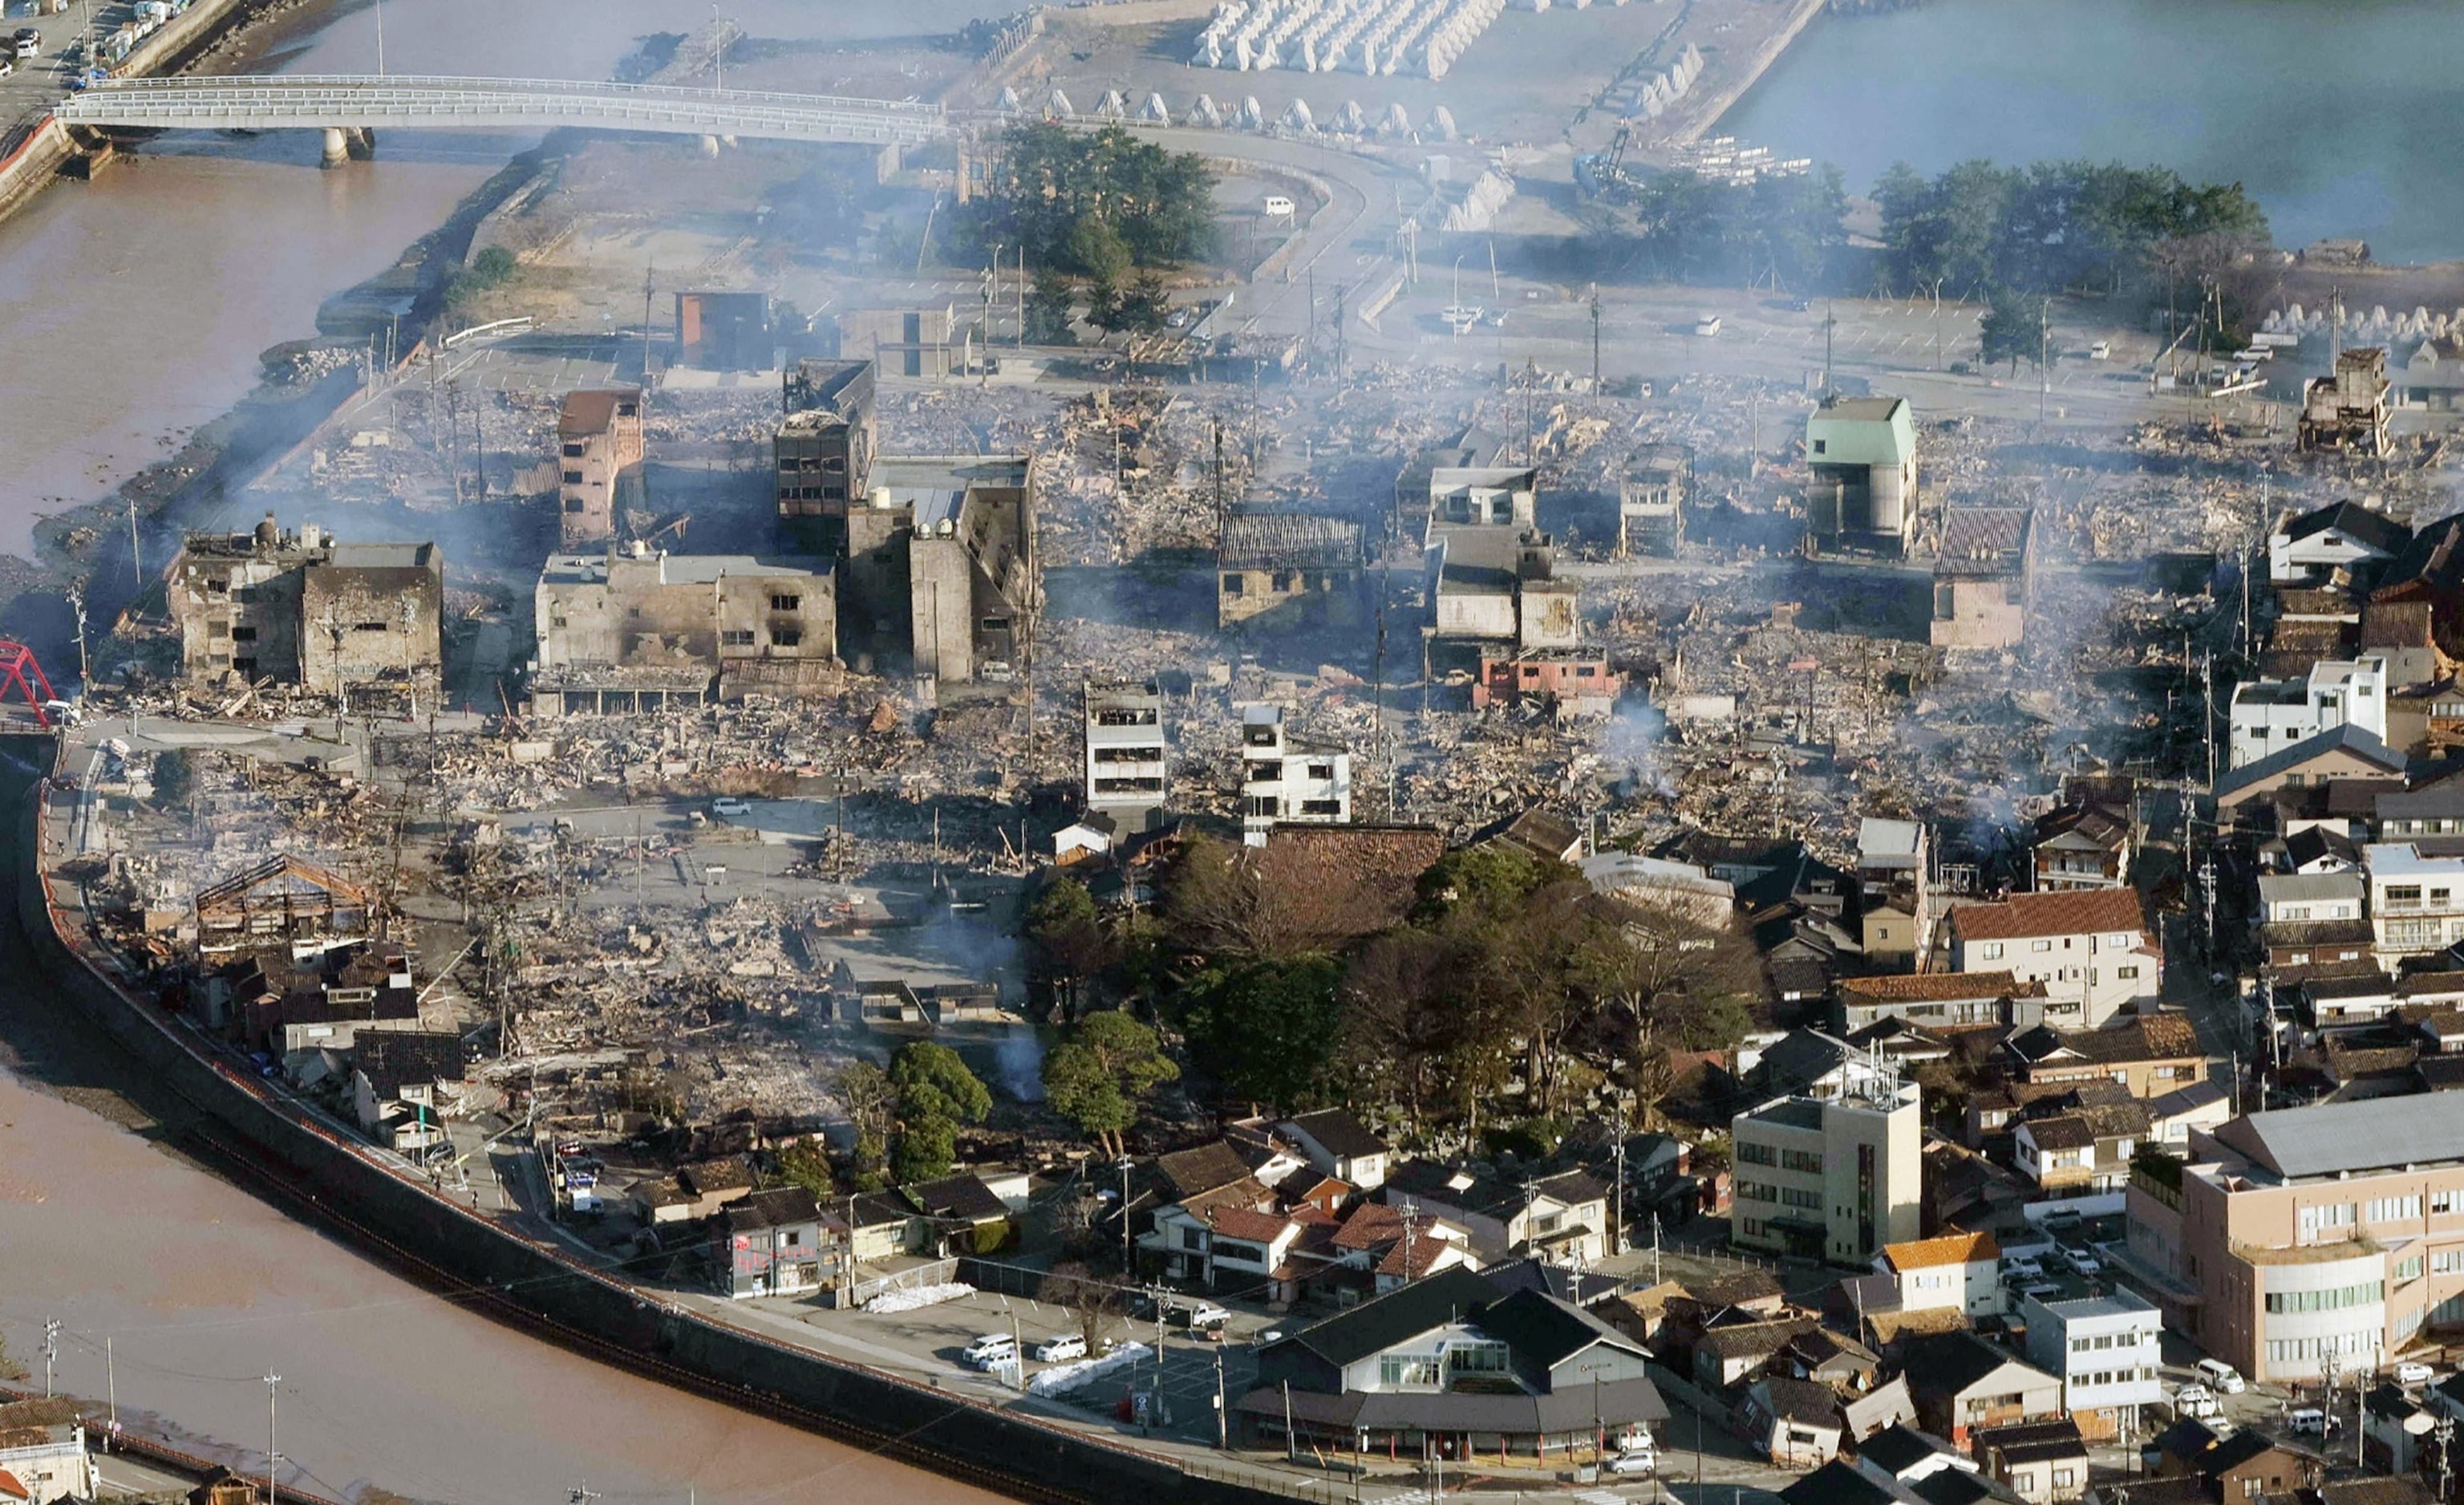 PHOTO: This aerial photo provided by Jiji Press shows smoke rising from an area following a large fire in Wajima, Ishikawa prefecture on January 2, 2024, a day after a major 7.5 magnitude earthquake struck the Noto region in Ishikawa prefecture 